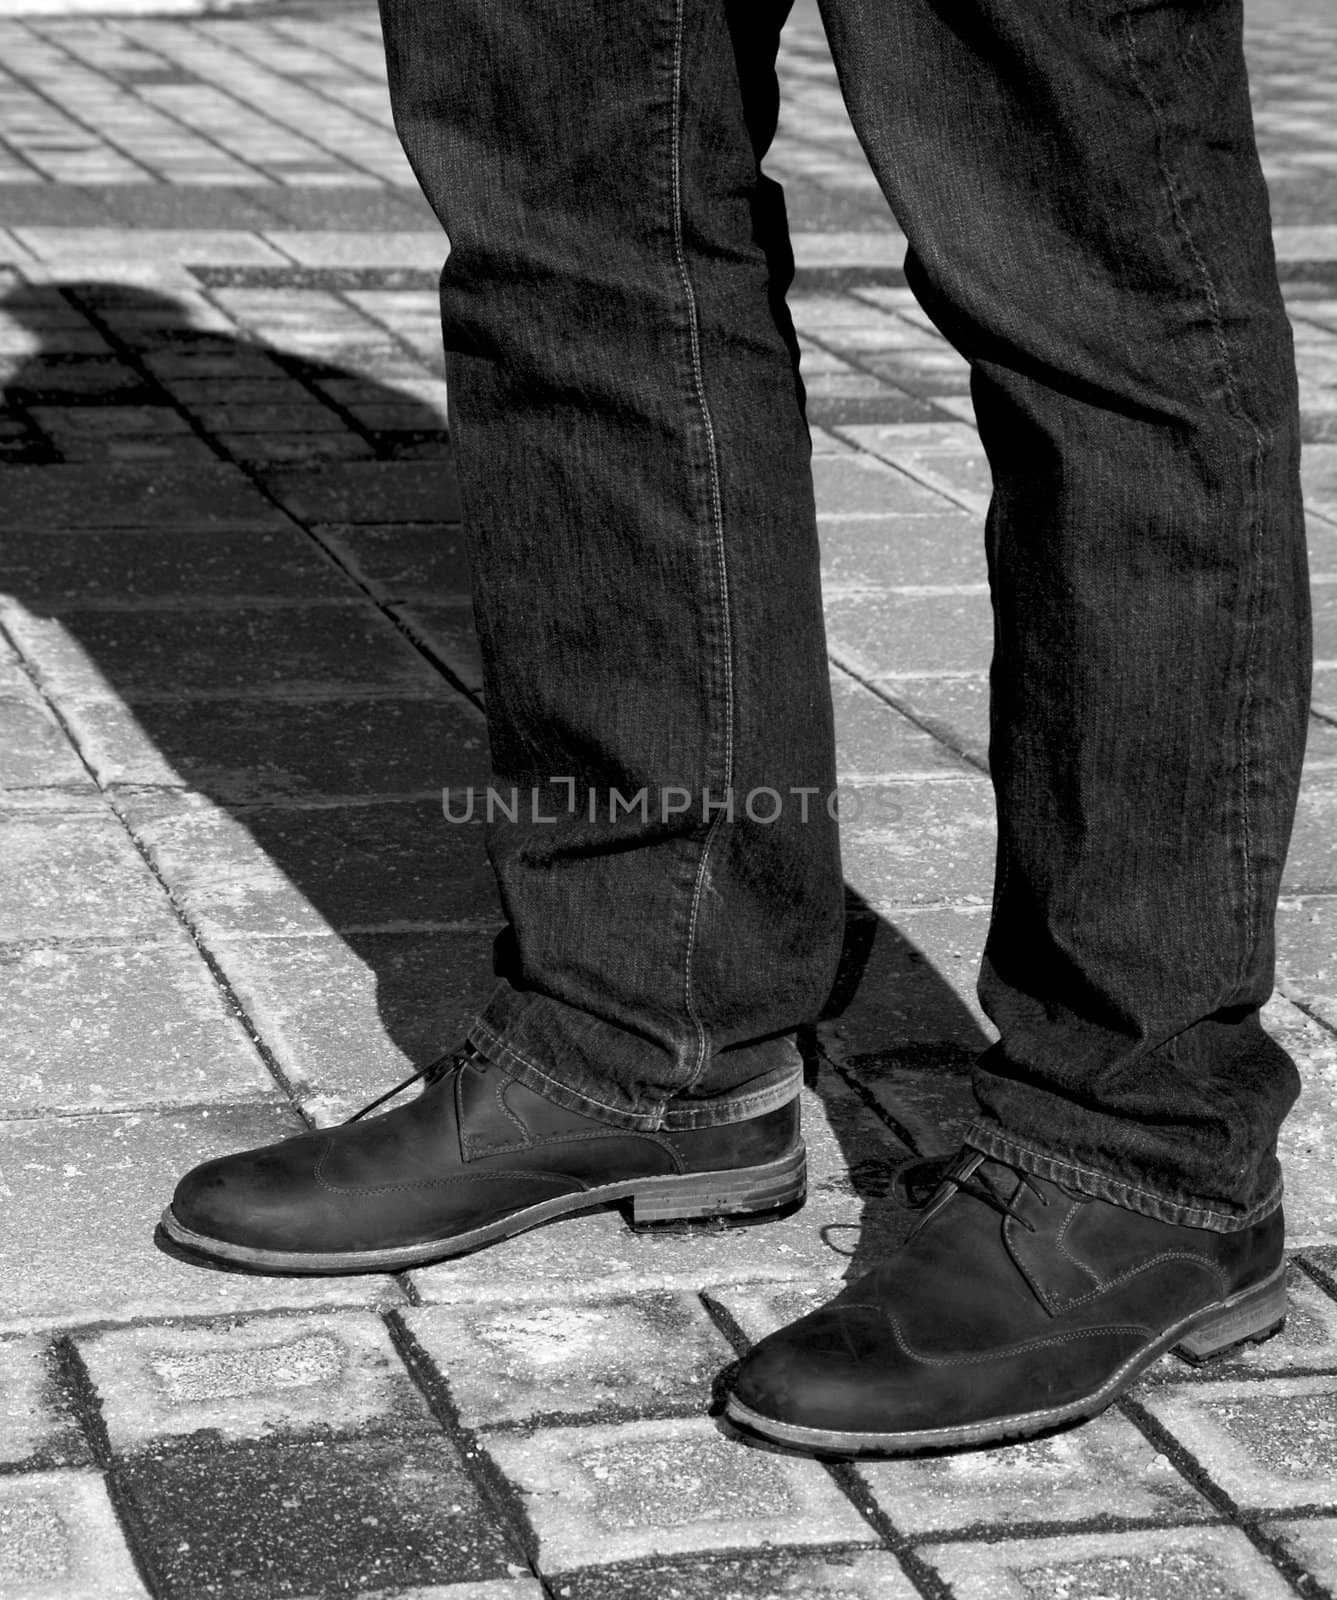 Dress Shoes and Jeans (monochrome) by Schvoo